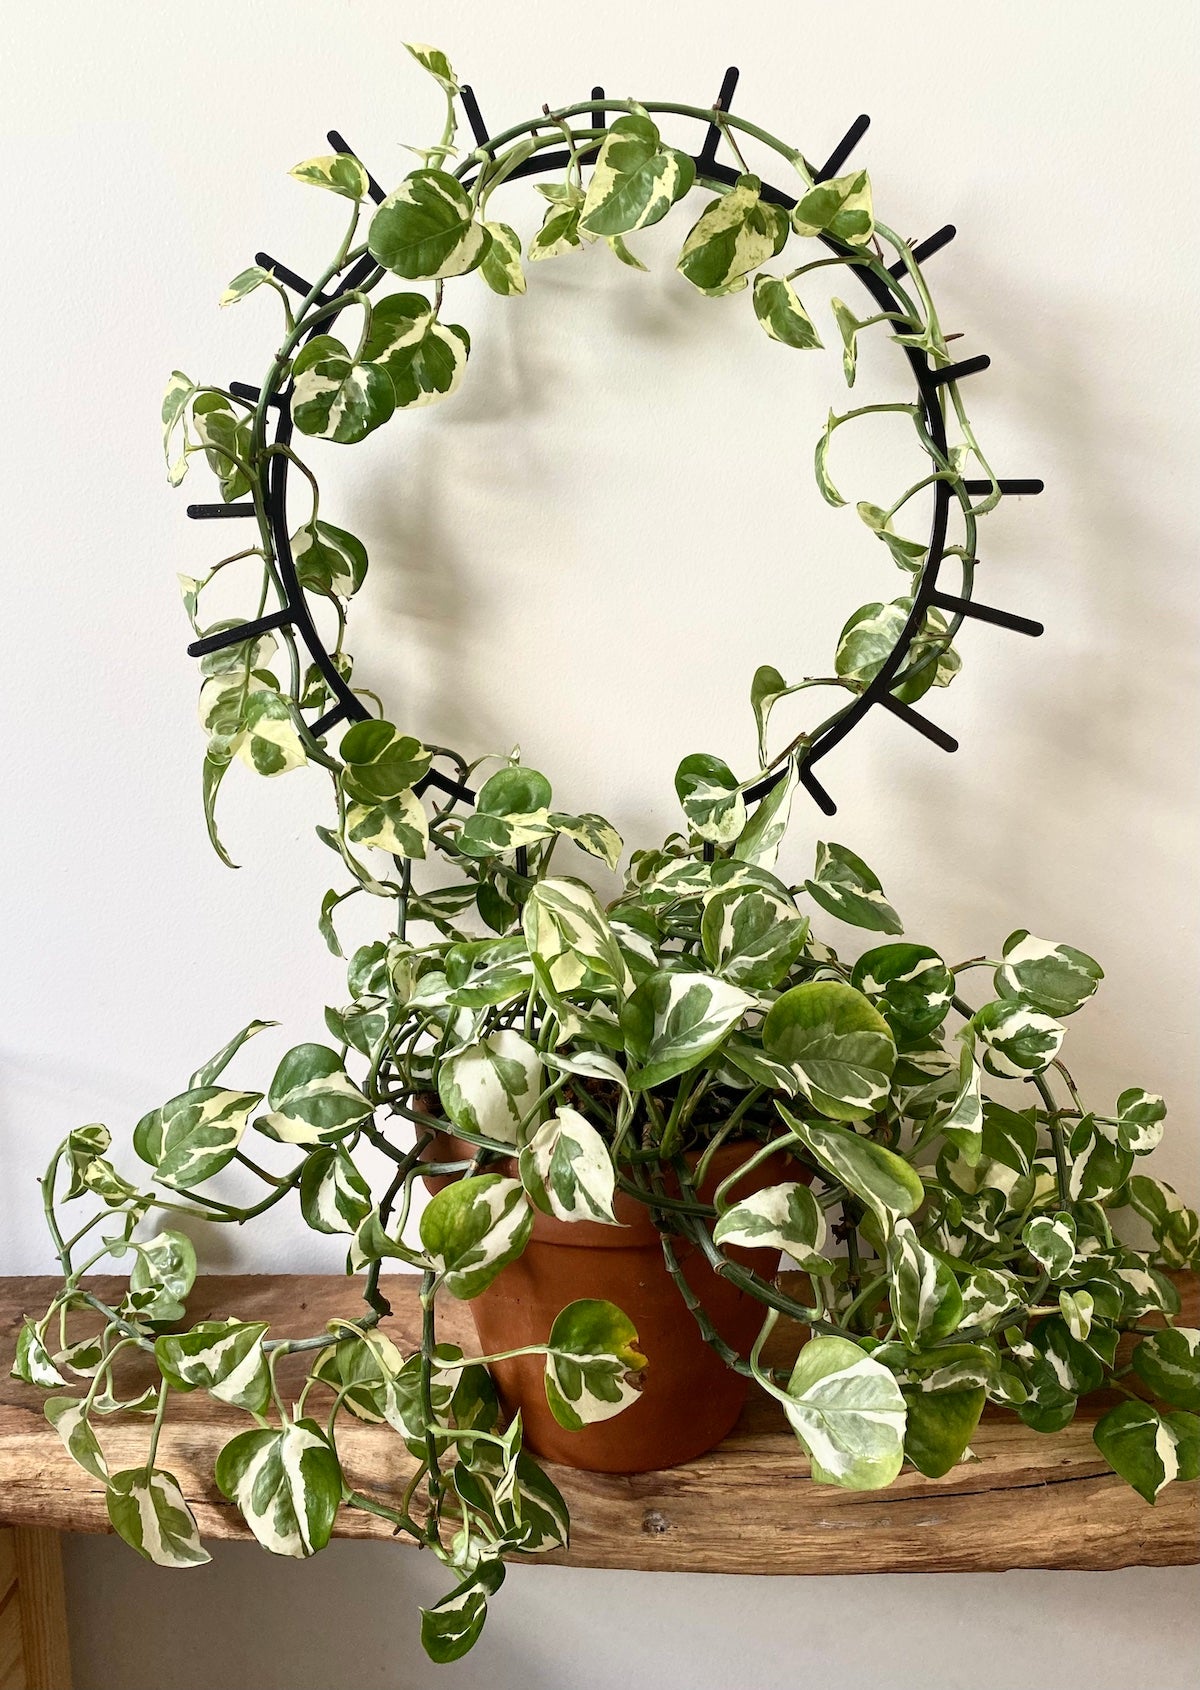 A variegated ivy, white and green leaves spills from an orange terracotta pot with some vines wrapping around a black starburst shape round plant trellis